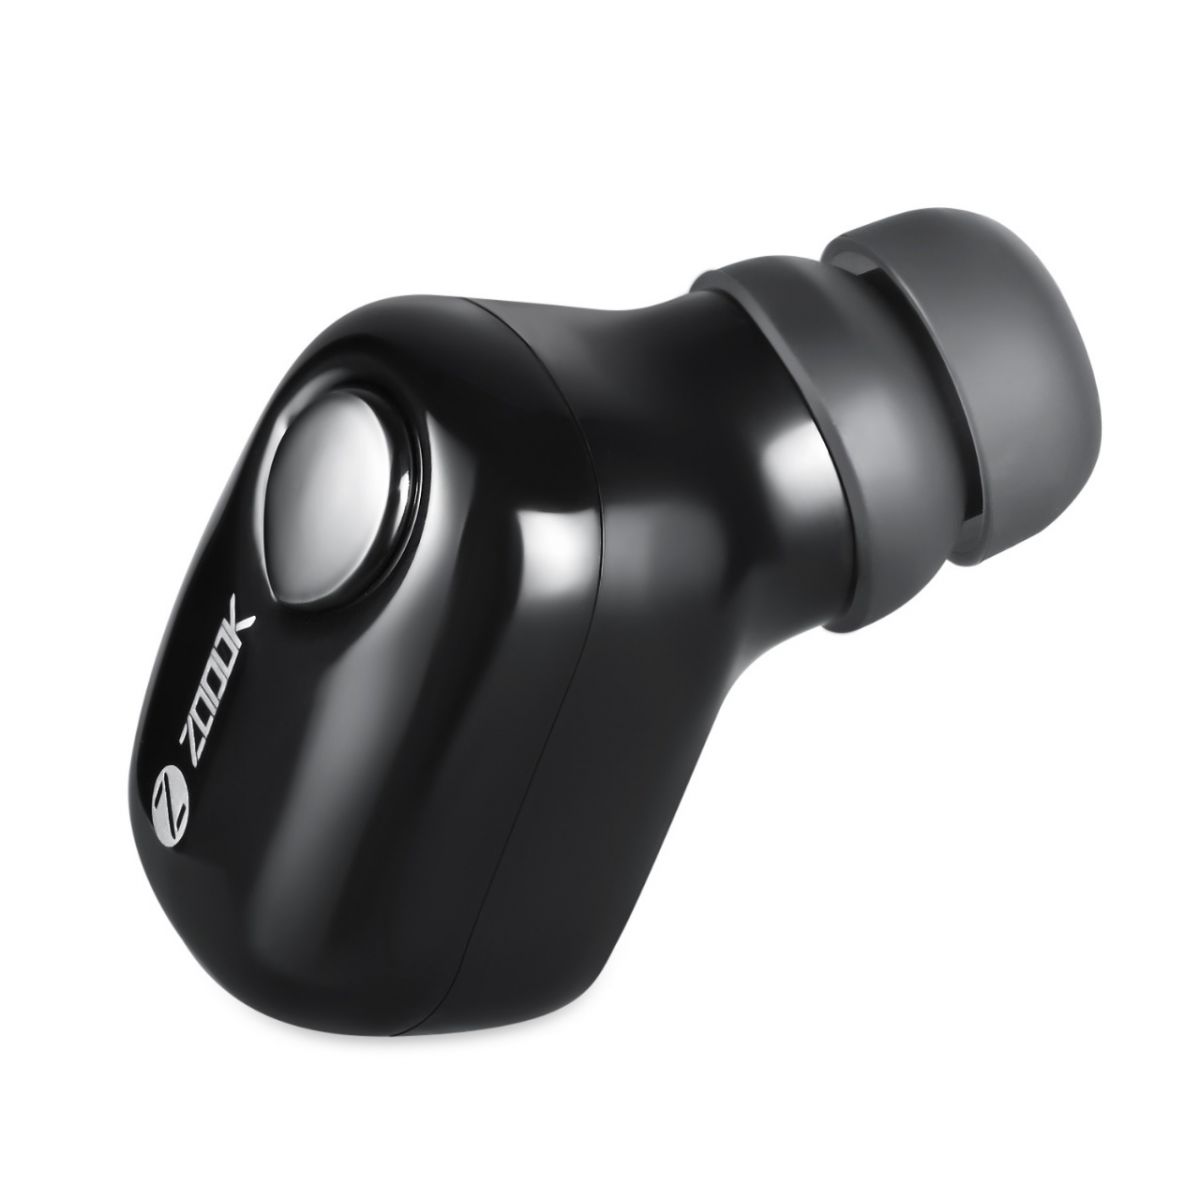 Zoook launches Halo- An ultra portable Bluetooth Headset